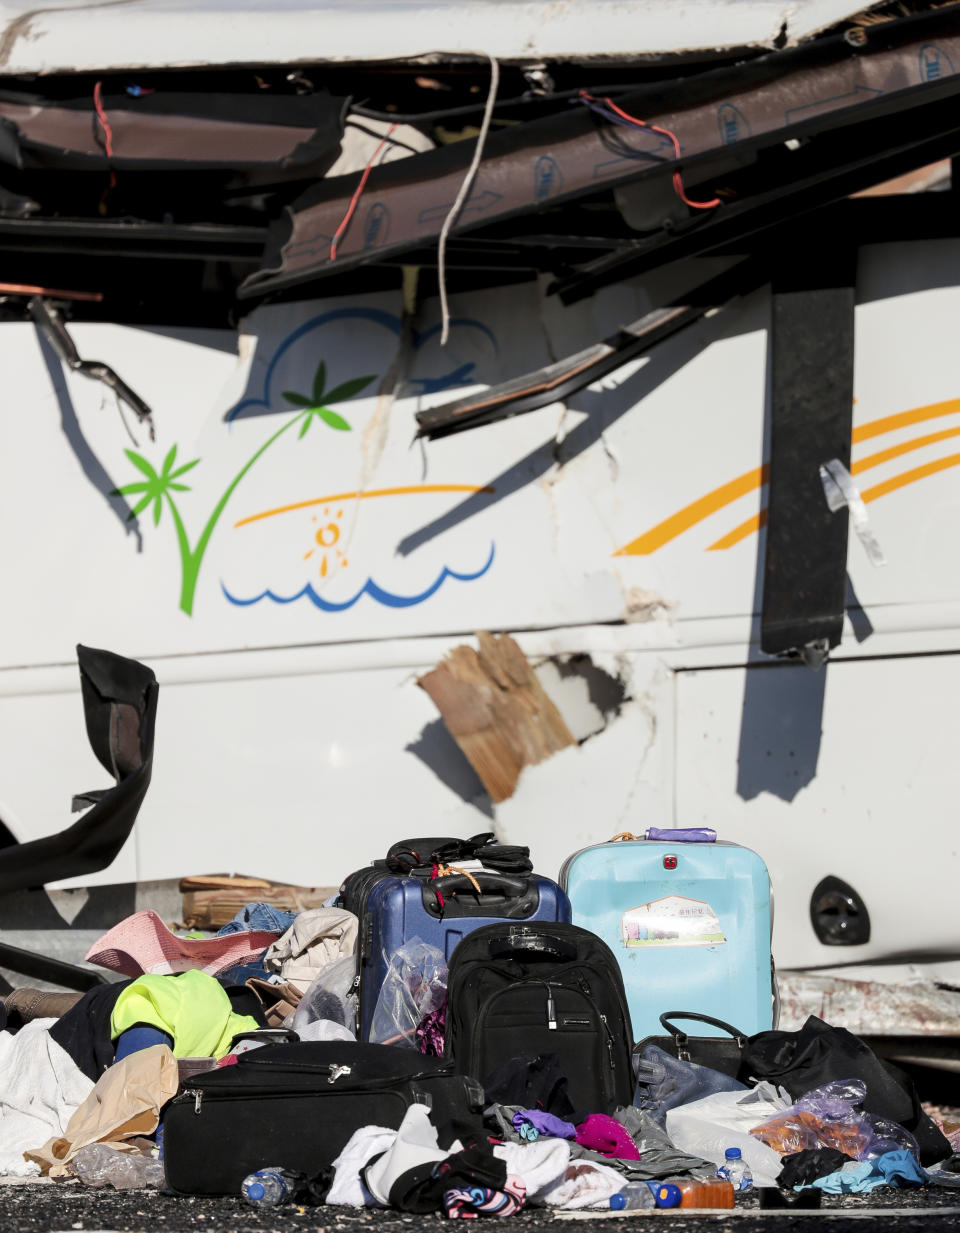 Luggage sits on the roadway at the scene where at least four people were killed in a tour bus crash near Bryce Canyon National Park, Friday, Sept. 20, 2019, in Utah. (Spenser Heaps/The Deseret News via AP)